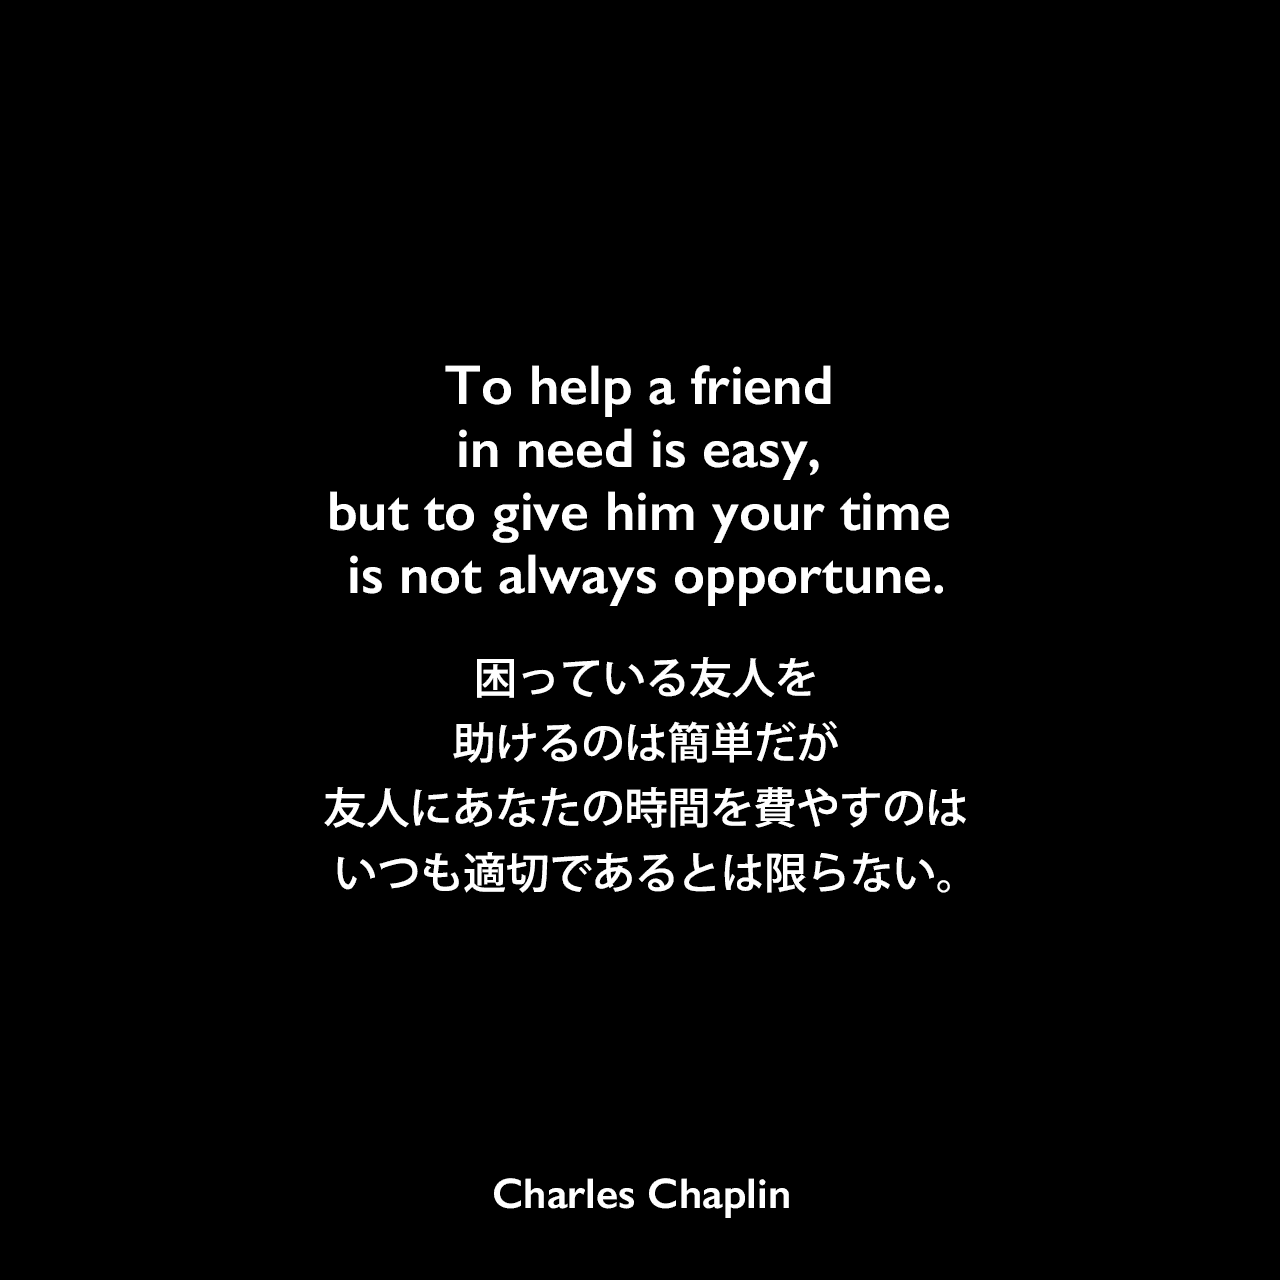 To help a friend in need is easy, but to give him your time is not always opportune.困っている友人を助けるのは簡単だが、友人にあなたの時間を費やすのはいつも適切であるとは限らない。Charles Chaplin